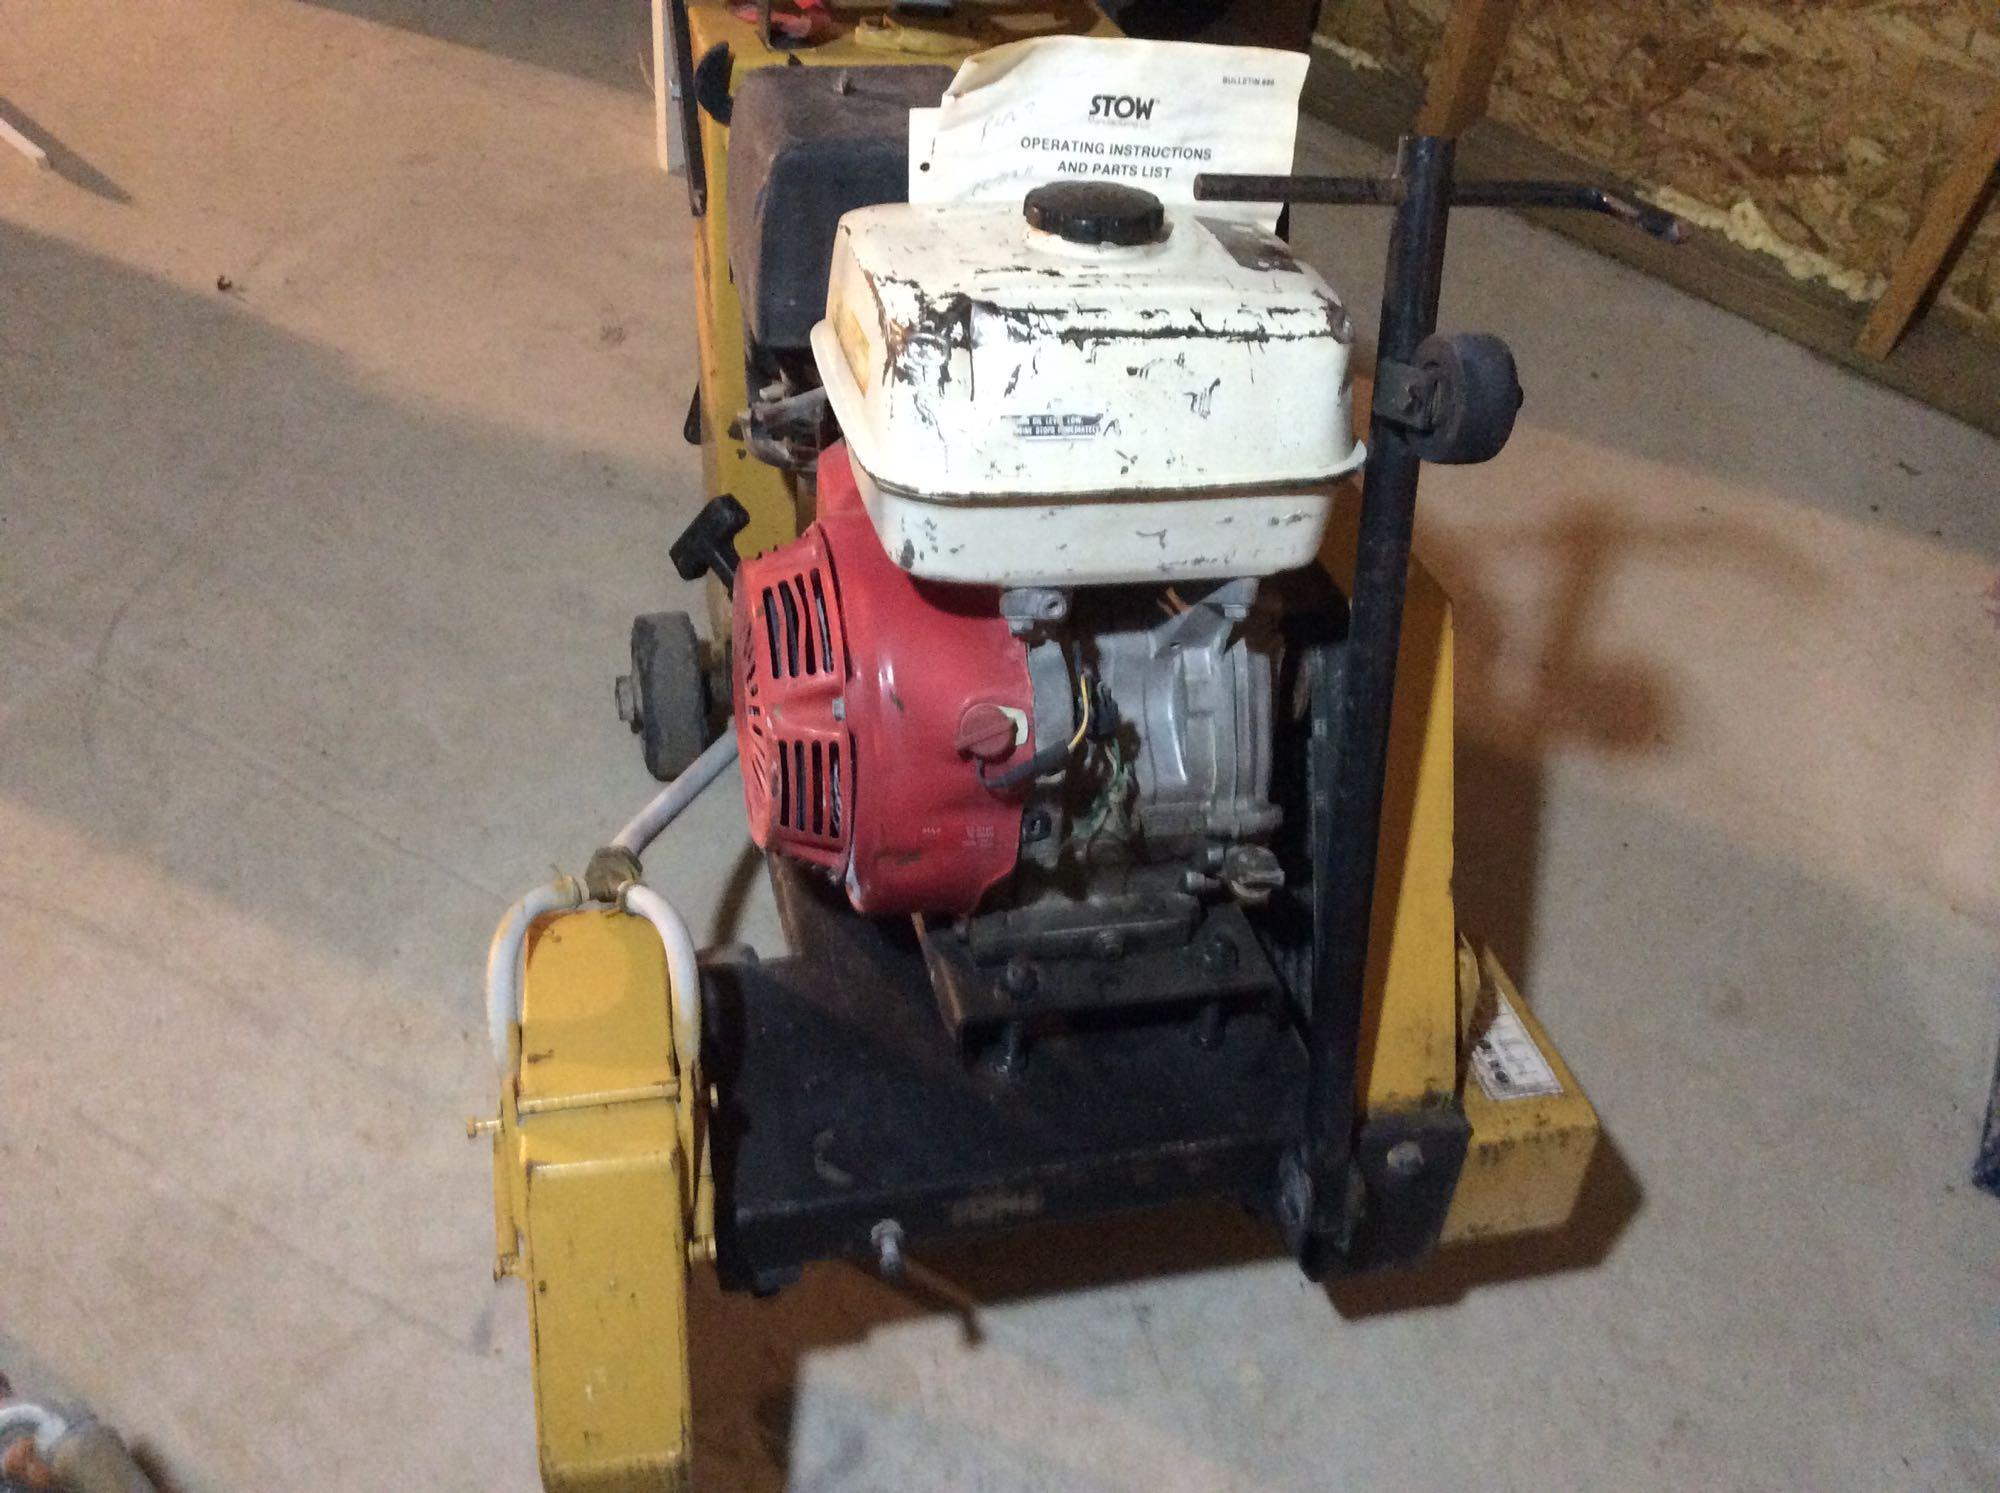 Stow concrete saw with Honda engine and 14 inch blade